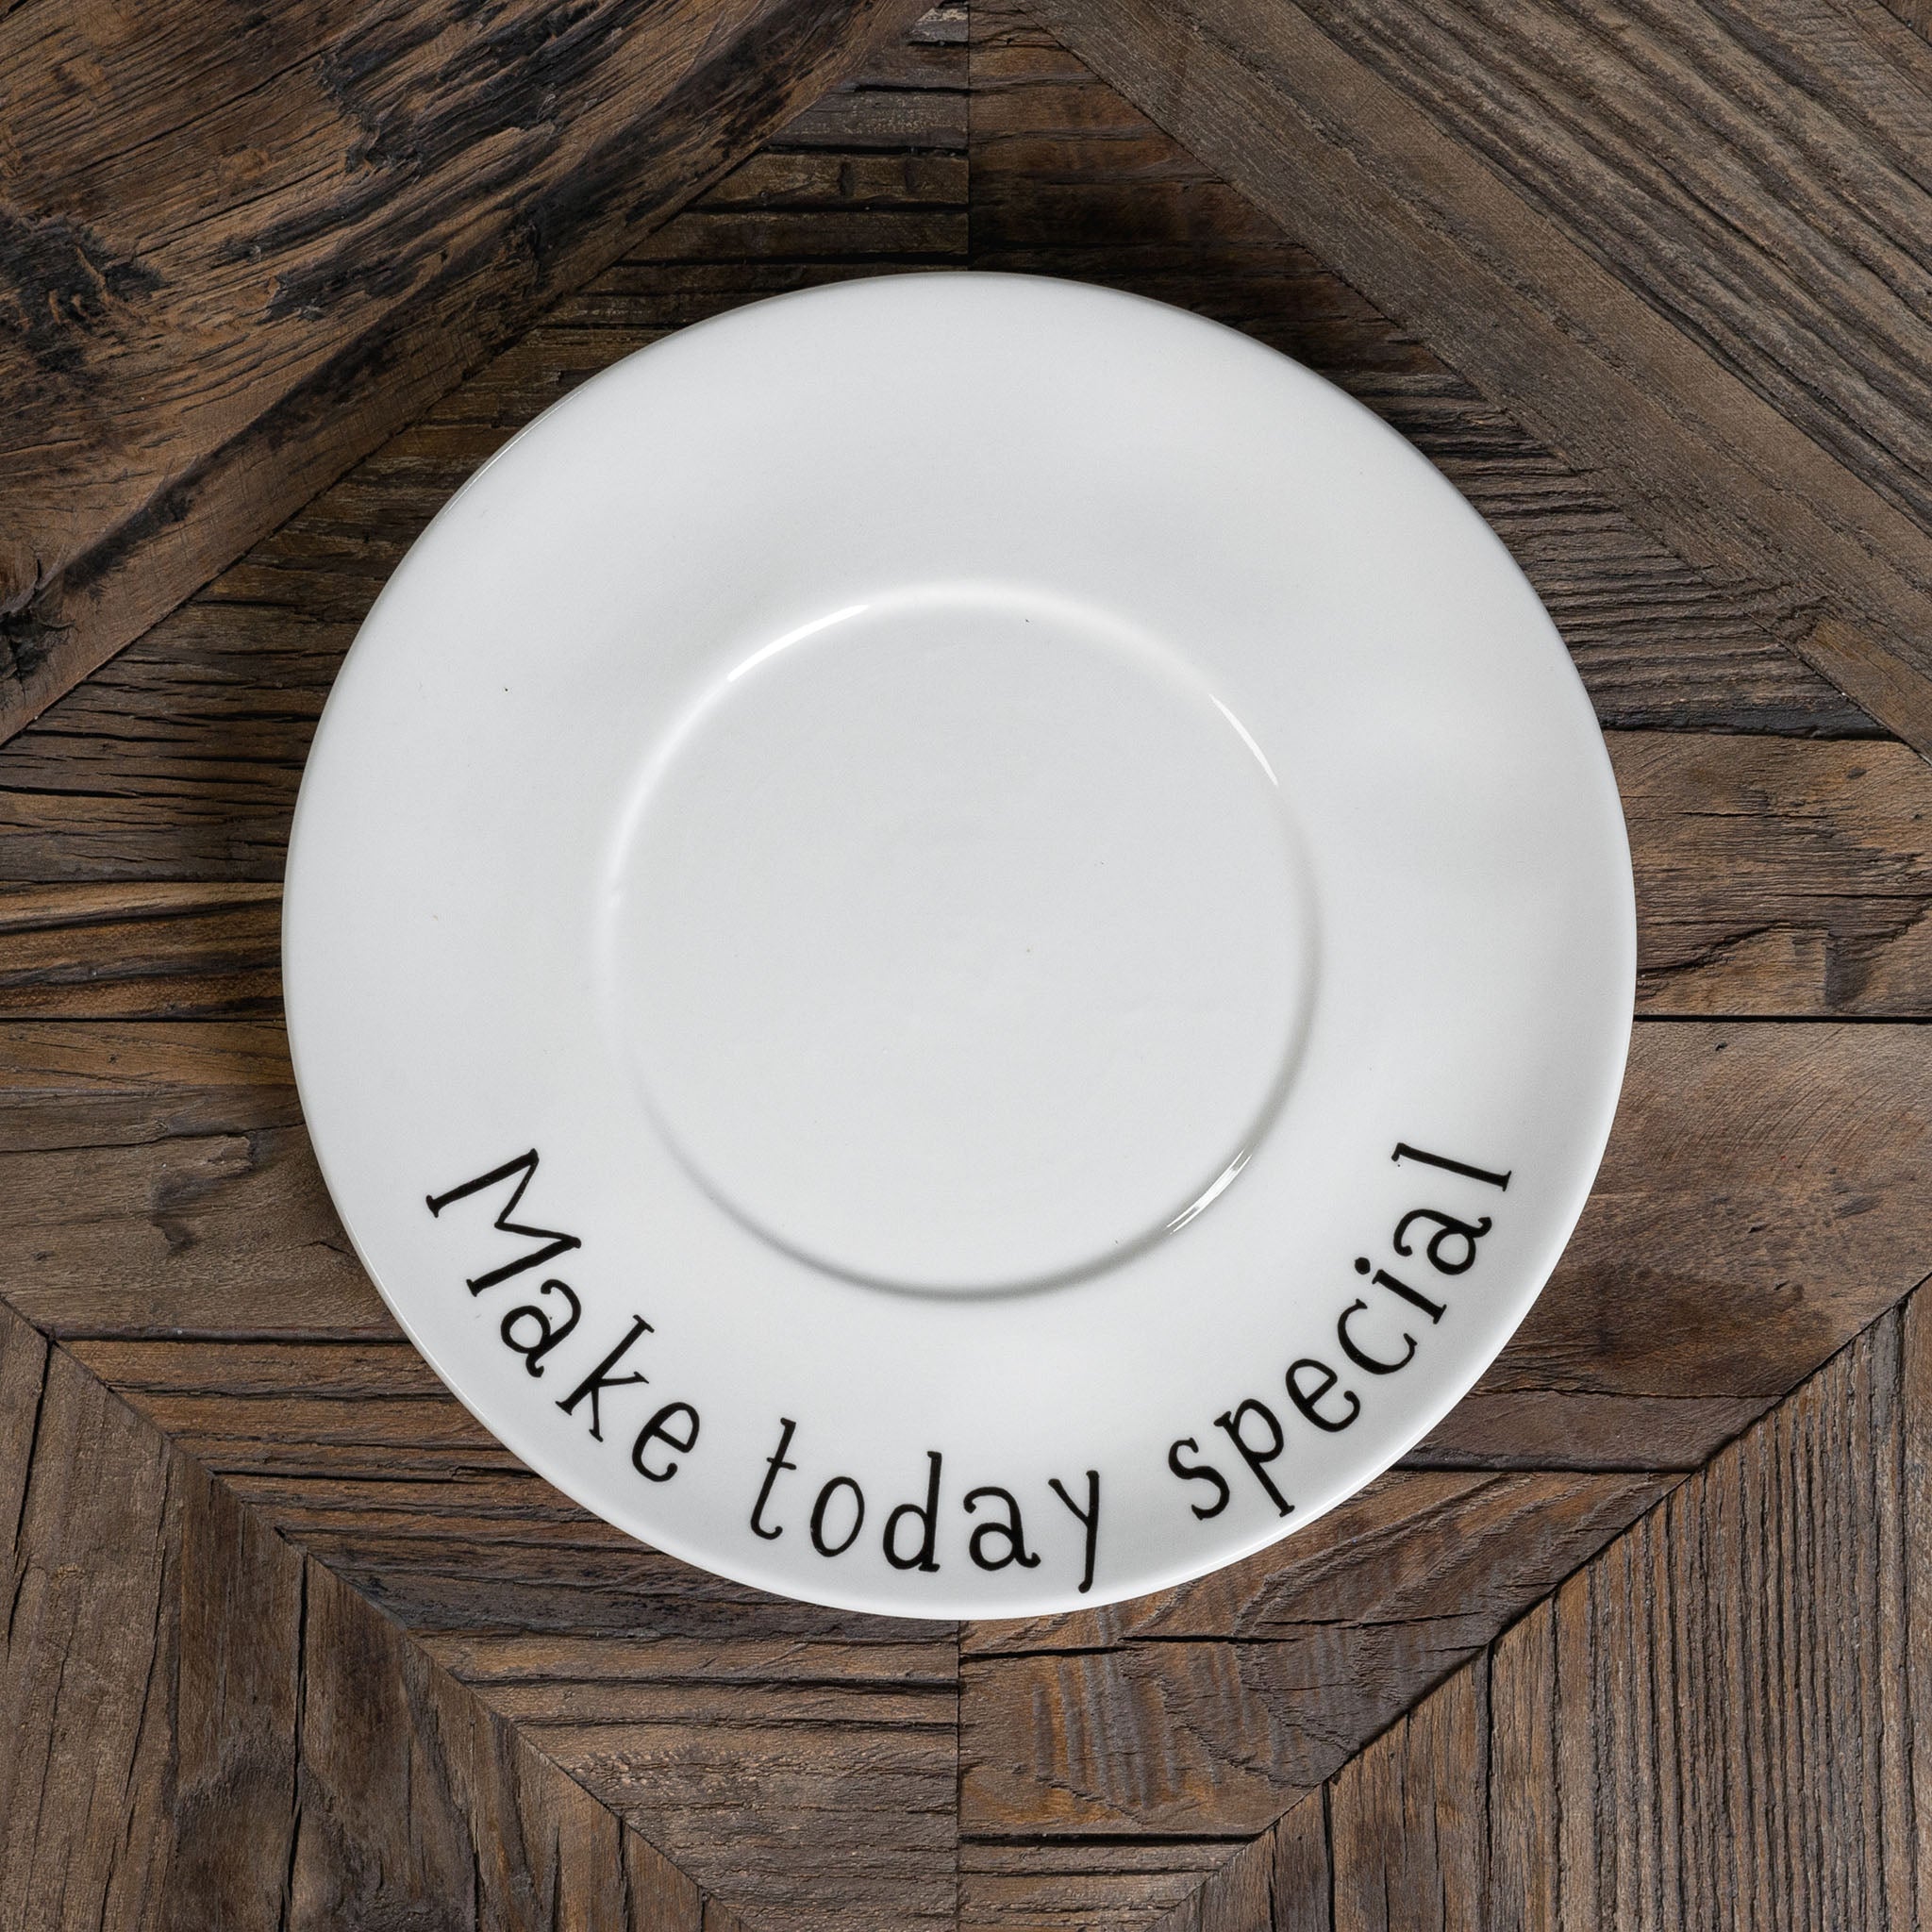 Make Today Special breakfast cup plates - Set of 2